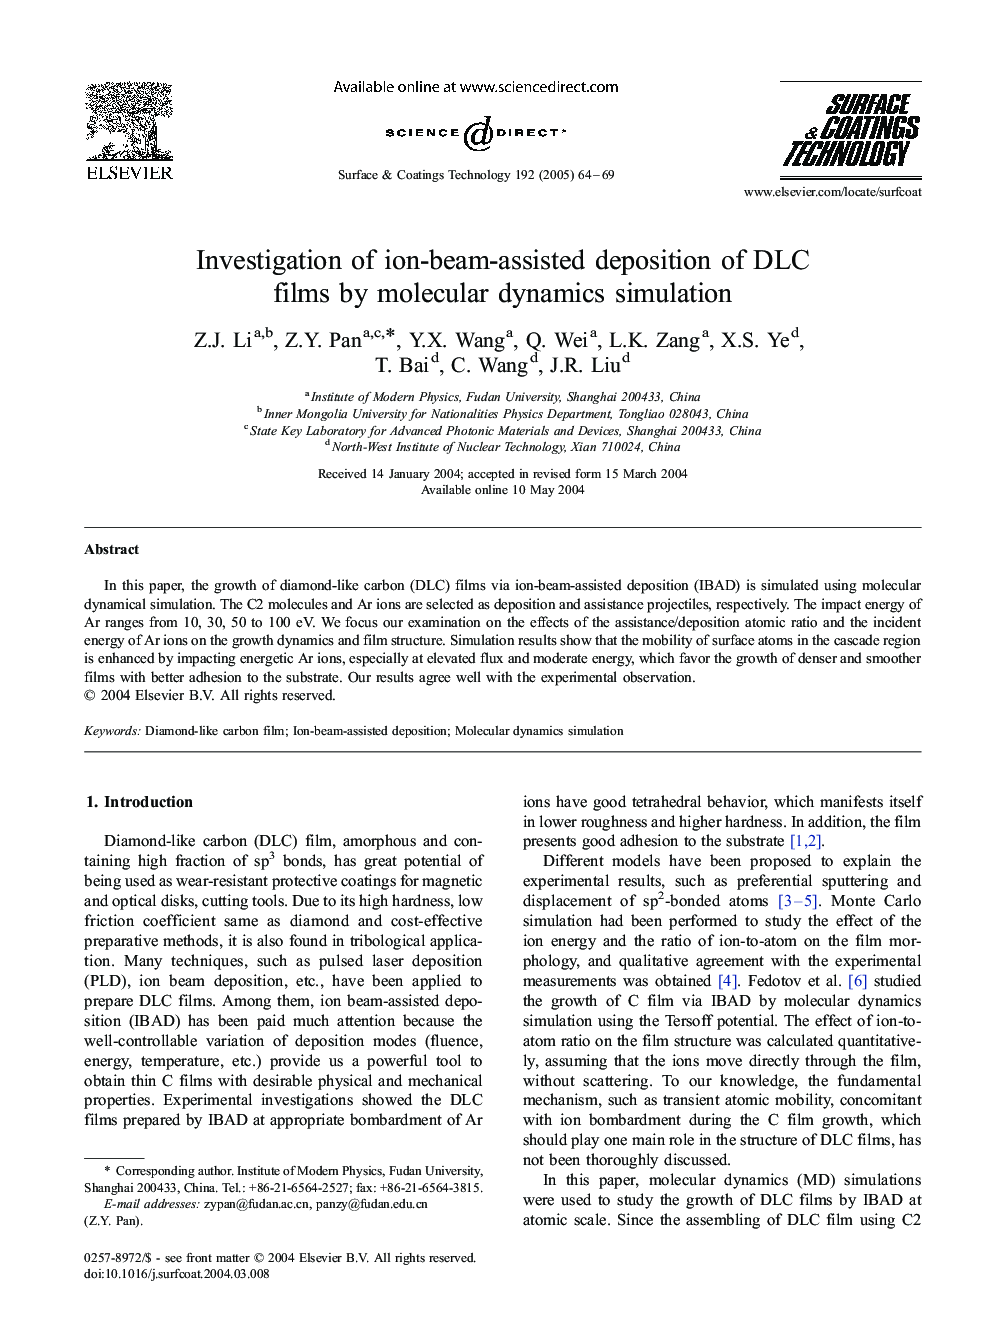 Investigation of ion-beam-assisted deposition of DLC films by molecular dynamics simulation